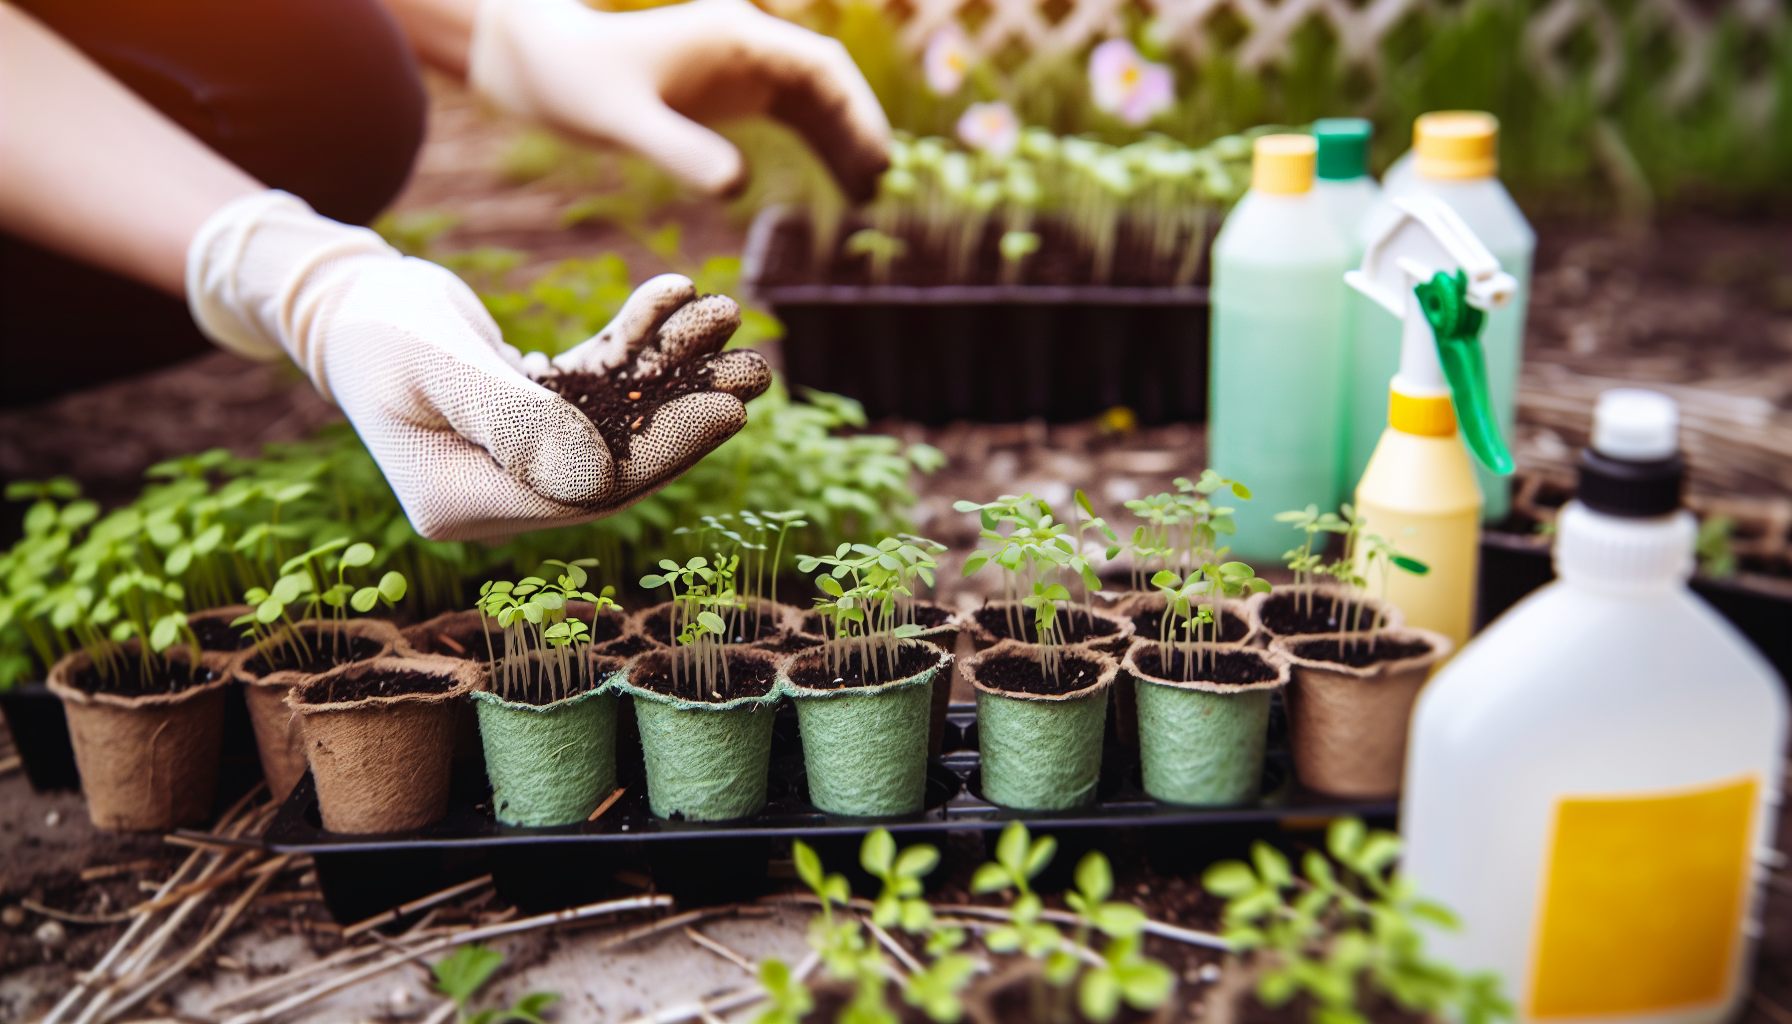 Protecting seedlings from pests and diseases